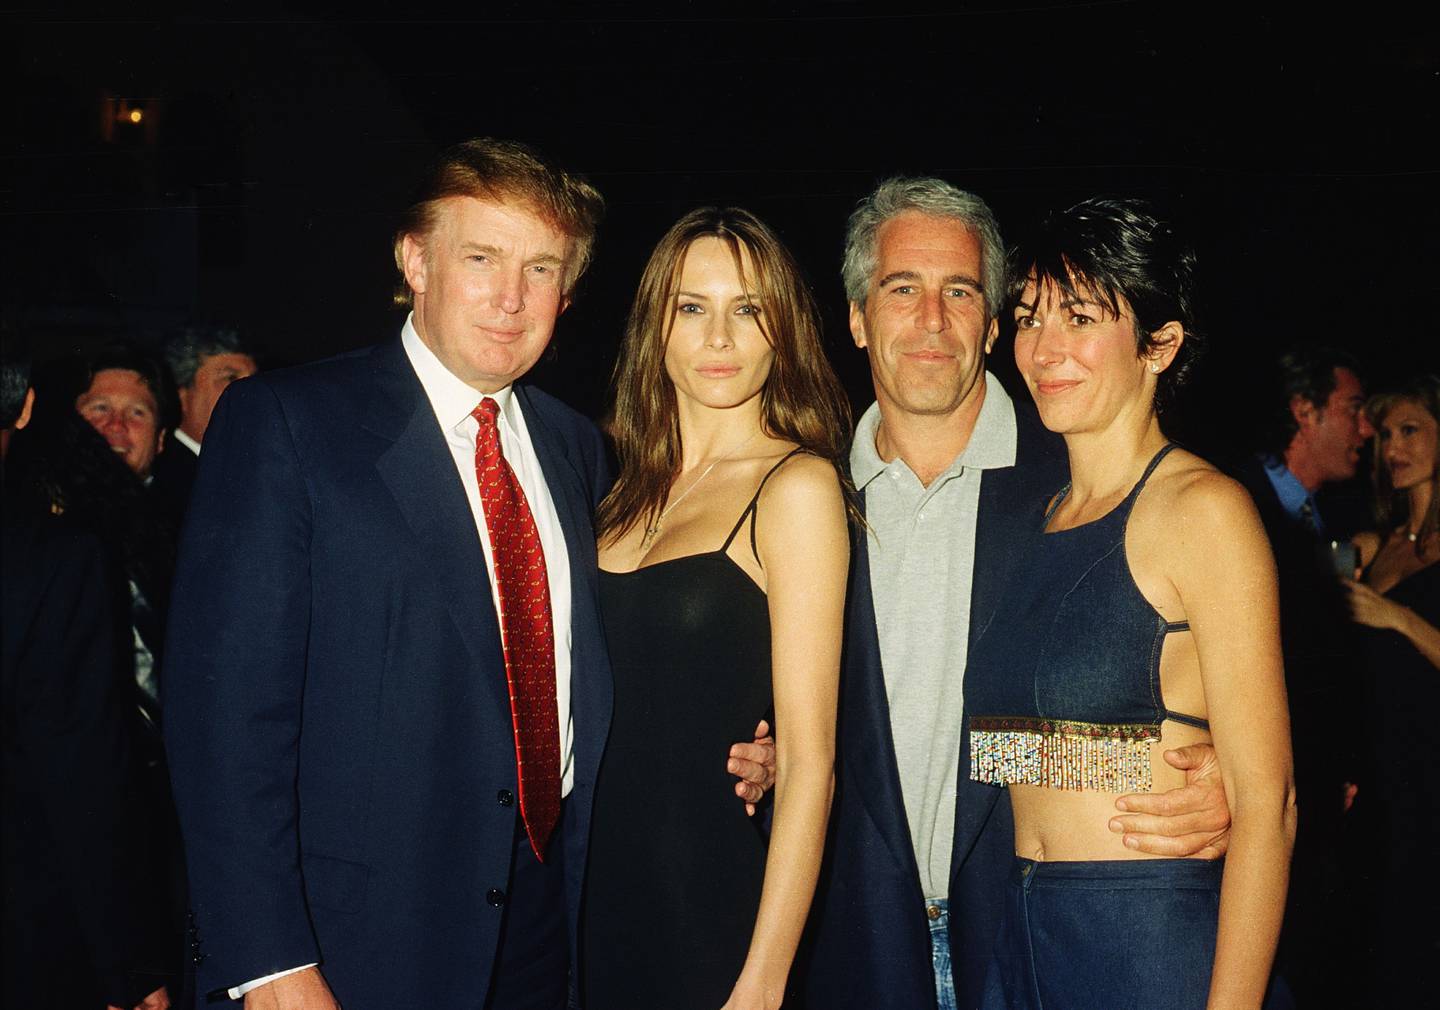 Convicted sex offenders Jeffrey Epstein and Ghislaine Maxwell pose with former US president and first lady, Donald and Melania Trump. Getty